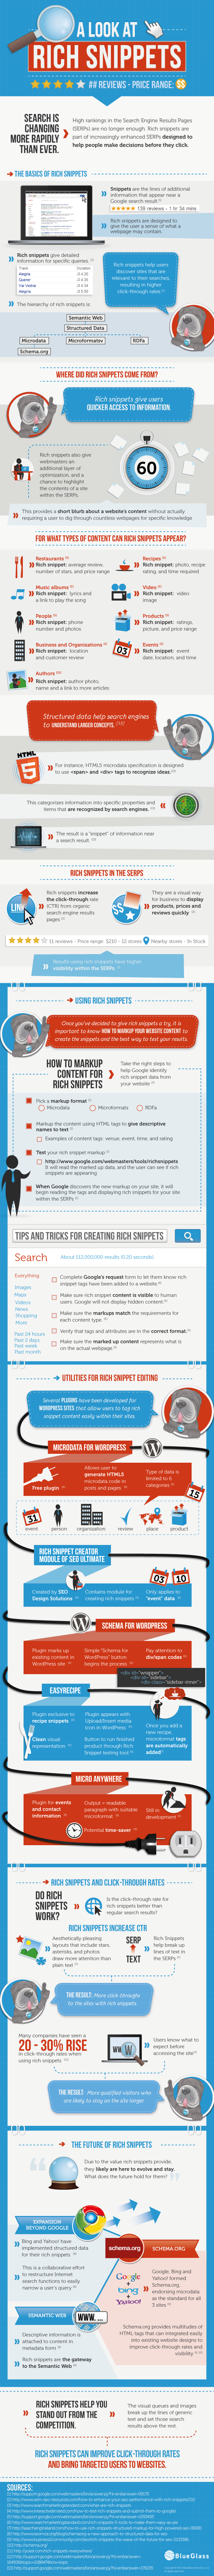 Infographie rich snippets